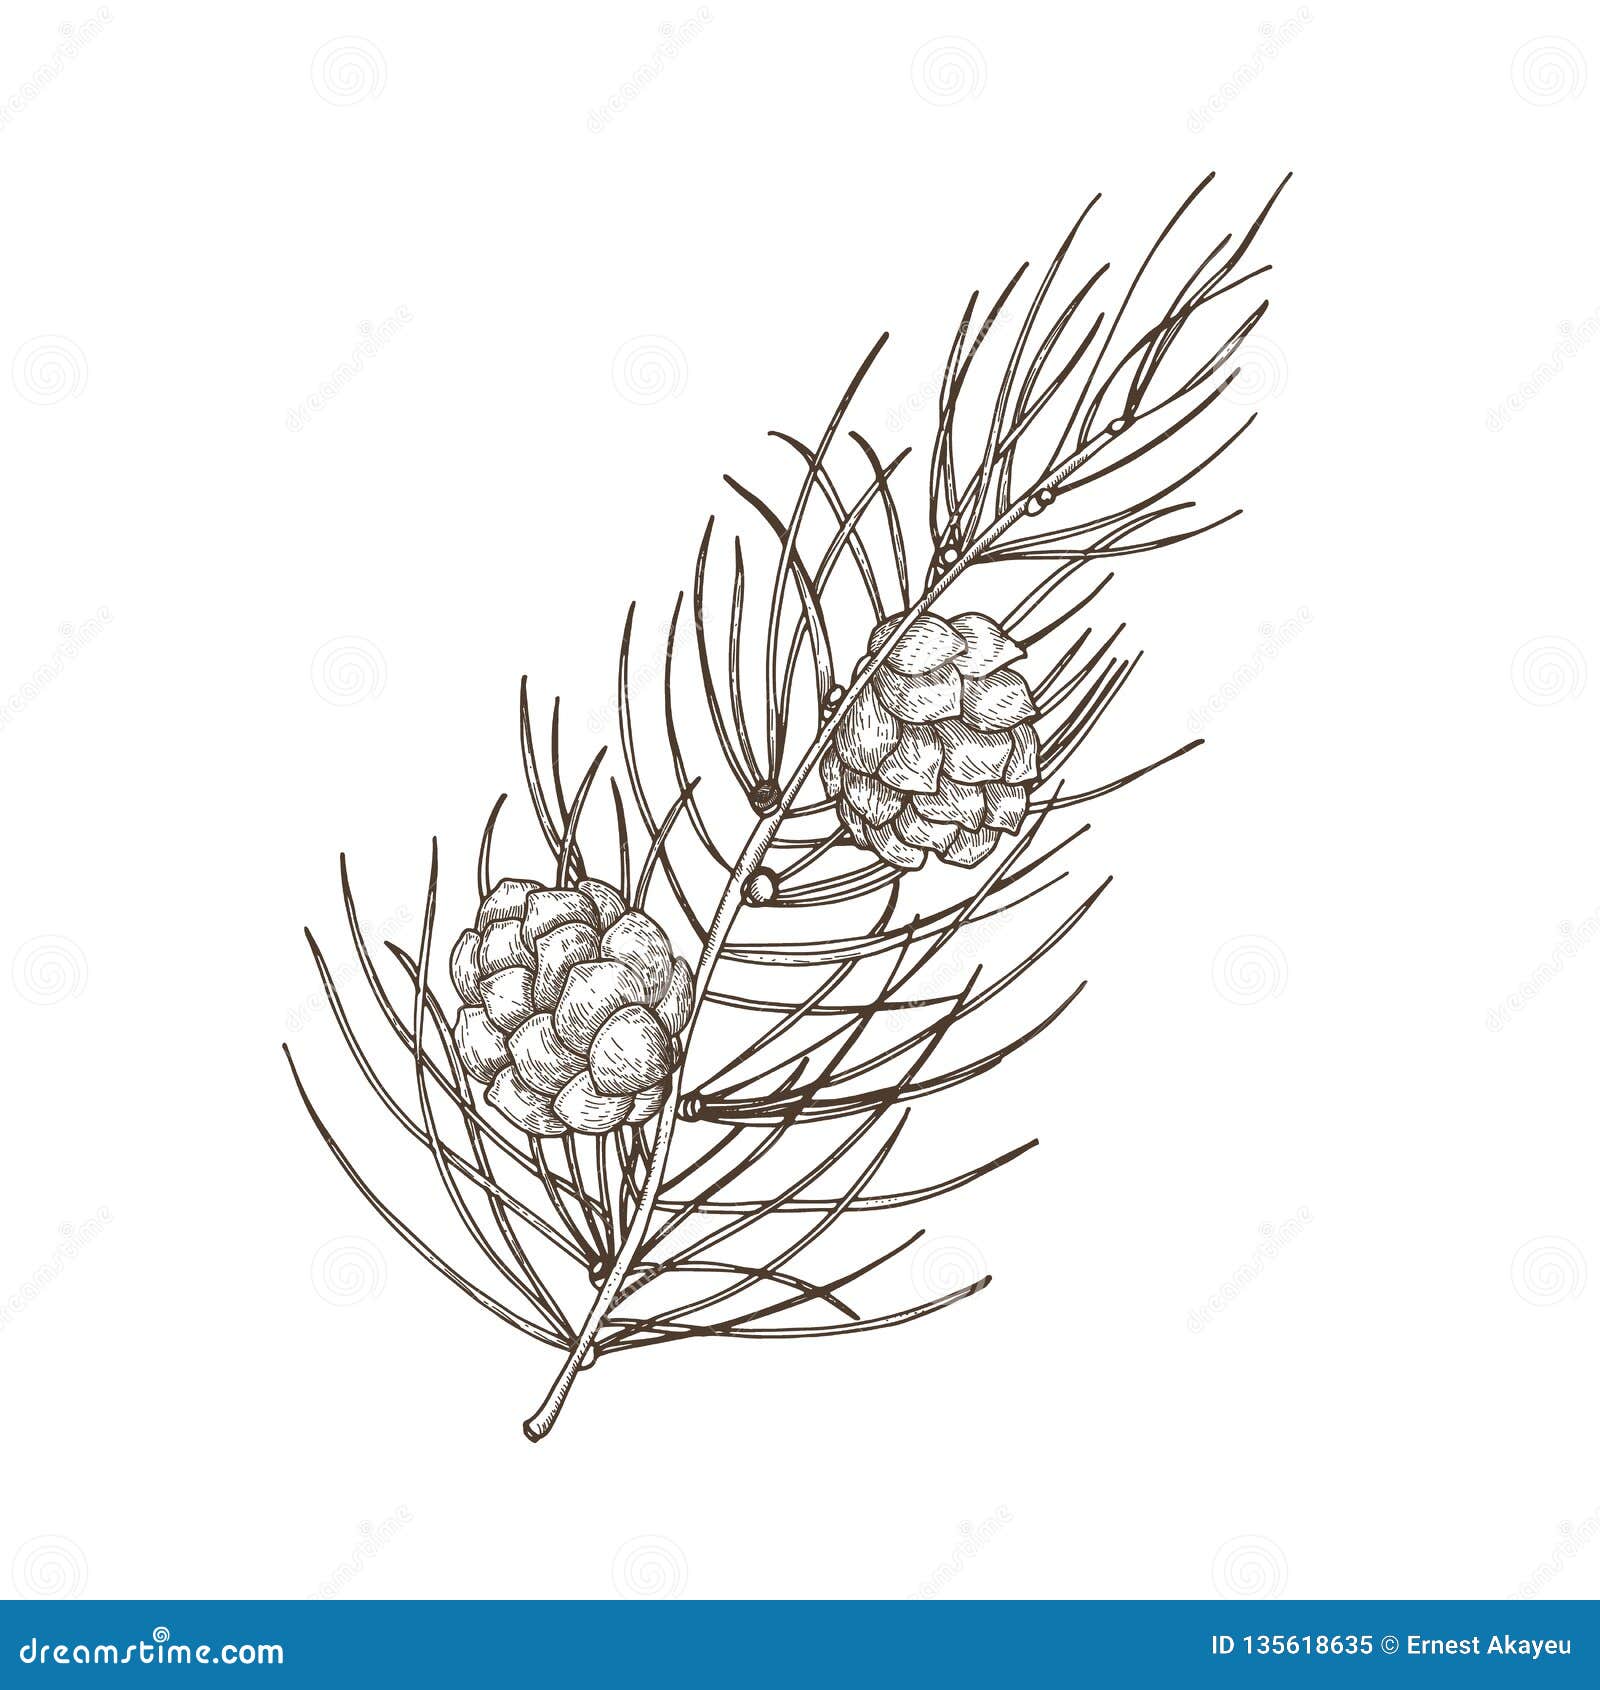 Hand Drawn Beautiful Botanical Drawing Of Pine Branch With Needle Like Foliage And Cones Evergreen Coniferous Tree Stock Vector Illustration Of Detail Beautiful